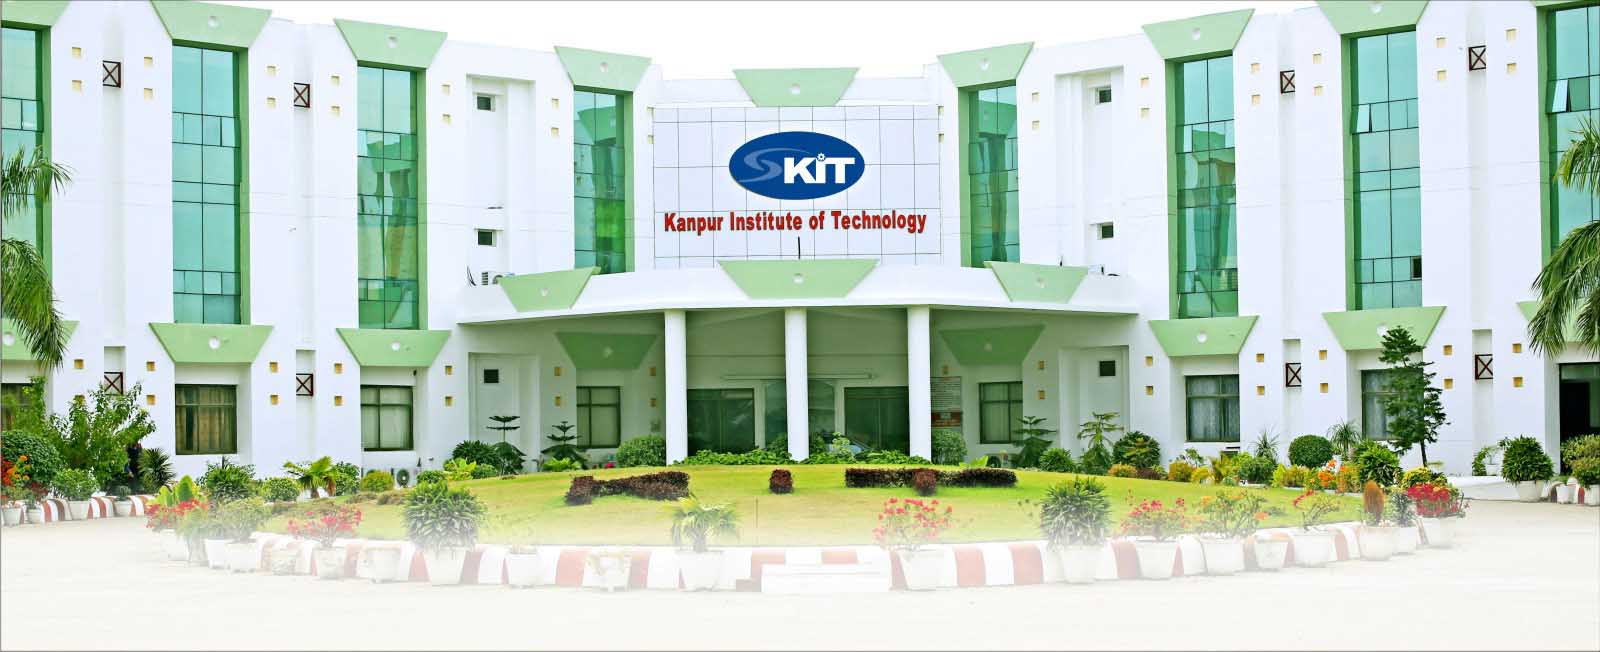 KANPUR INSTITUTE OF TECHNOLOGY, Kanpur